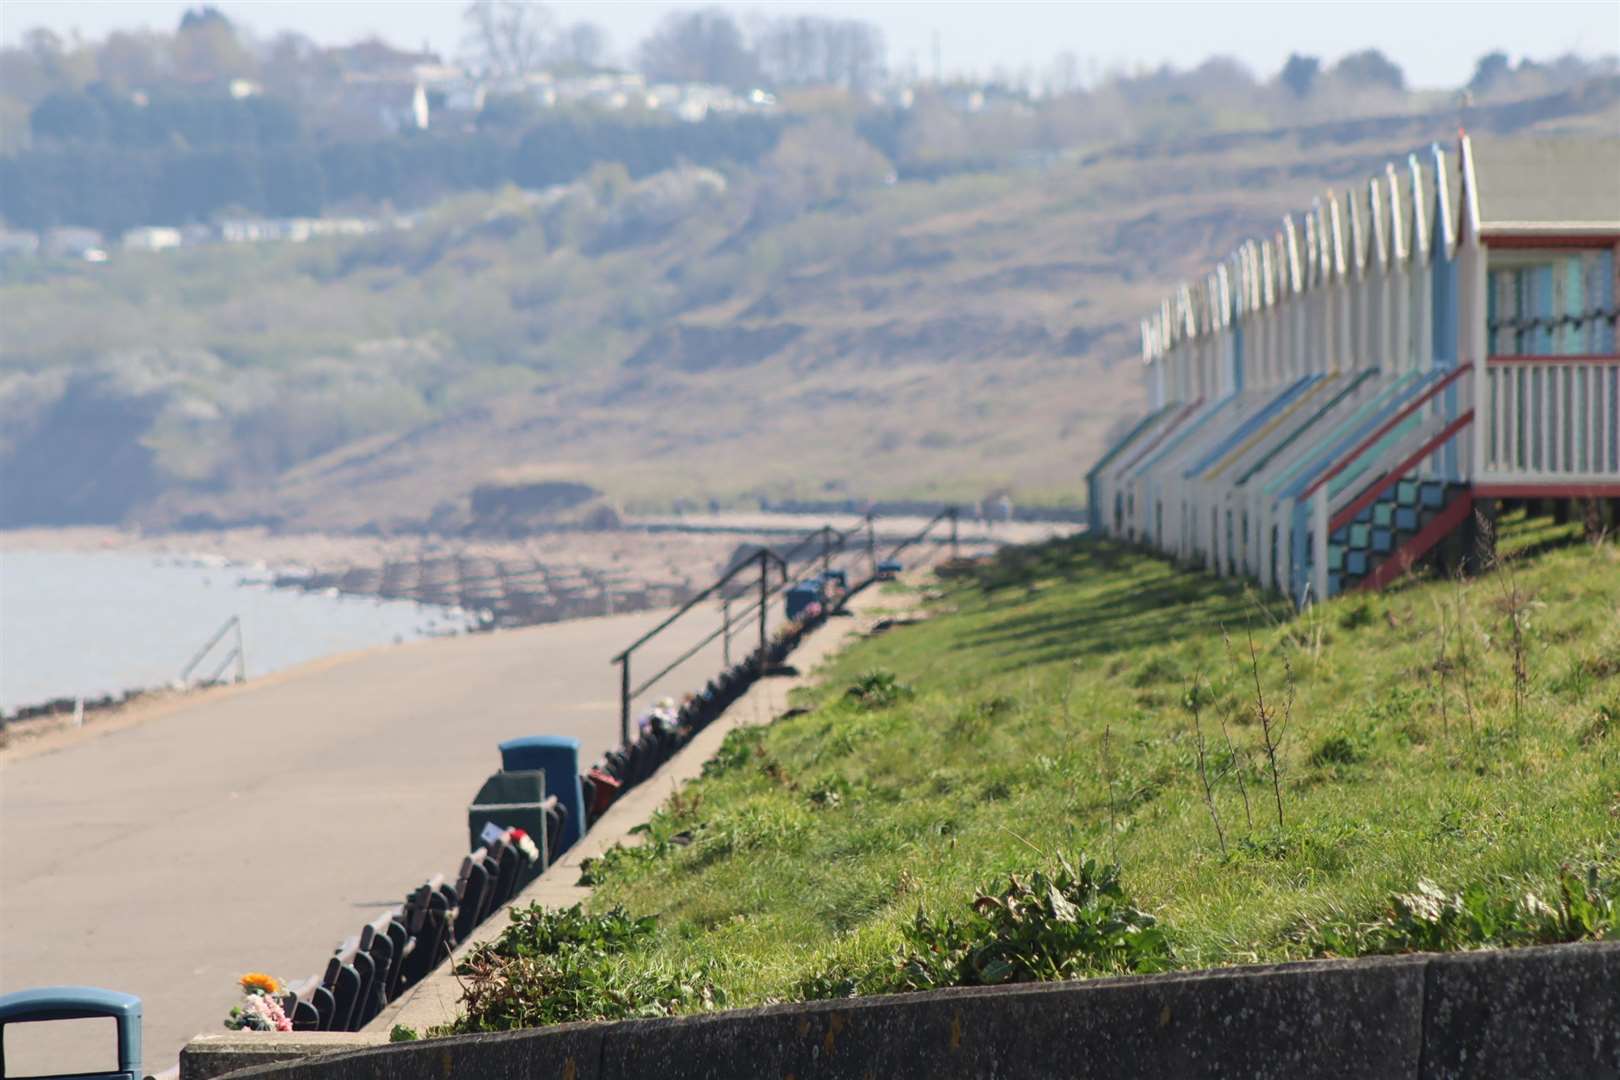 People can now travel to the coast following the Government's easing of lockdown